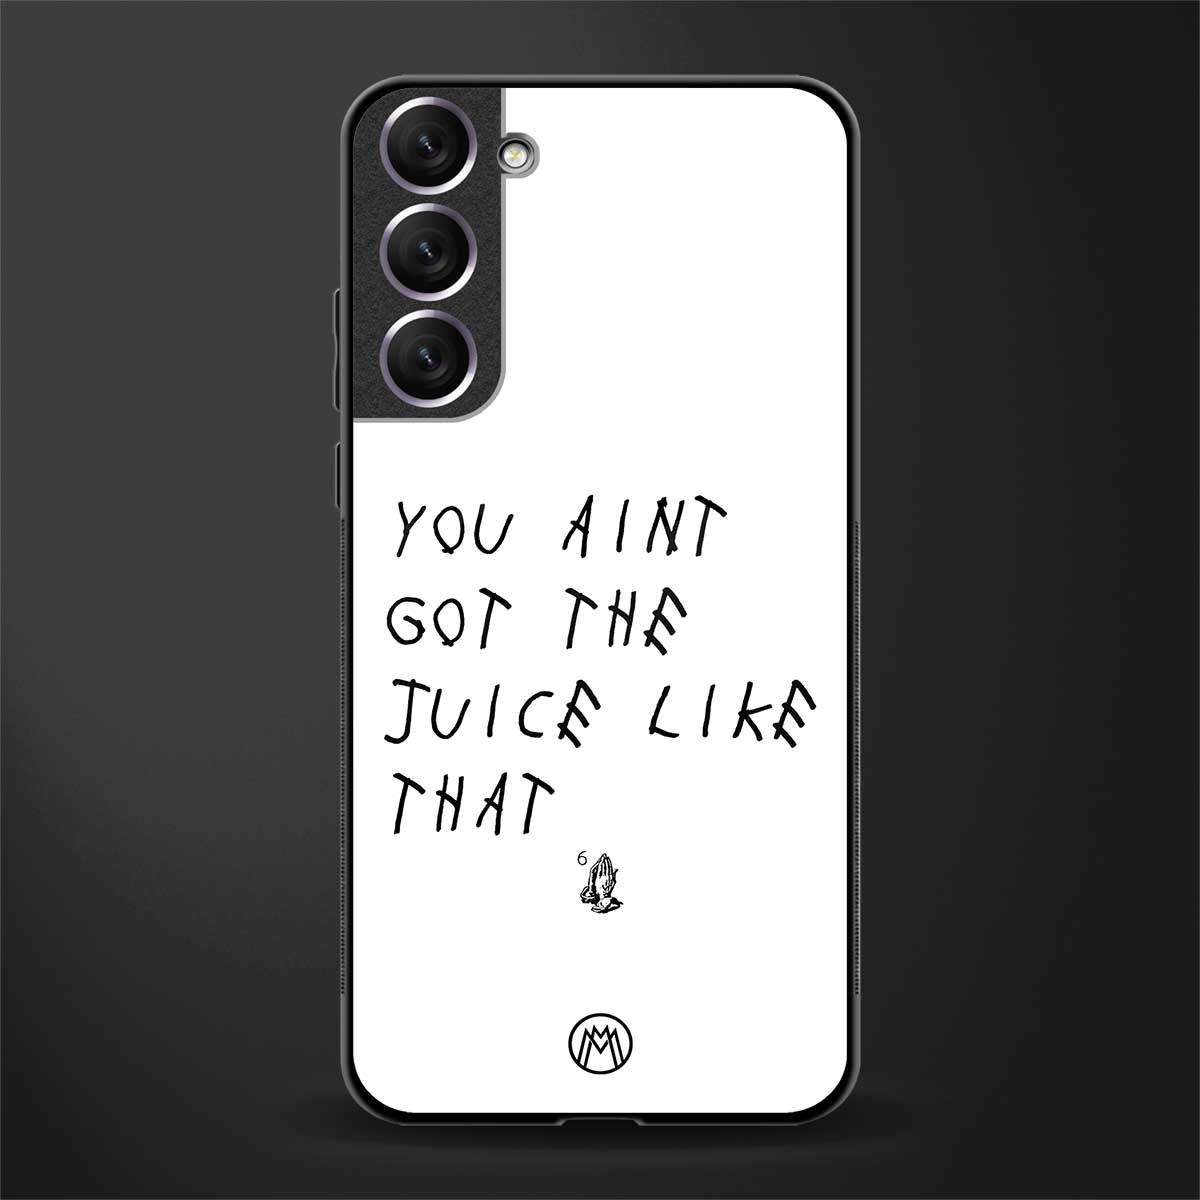 ain't got the juice white edition glass case for samsung galaxy s21 plus image